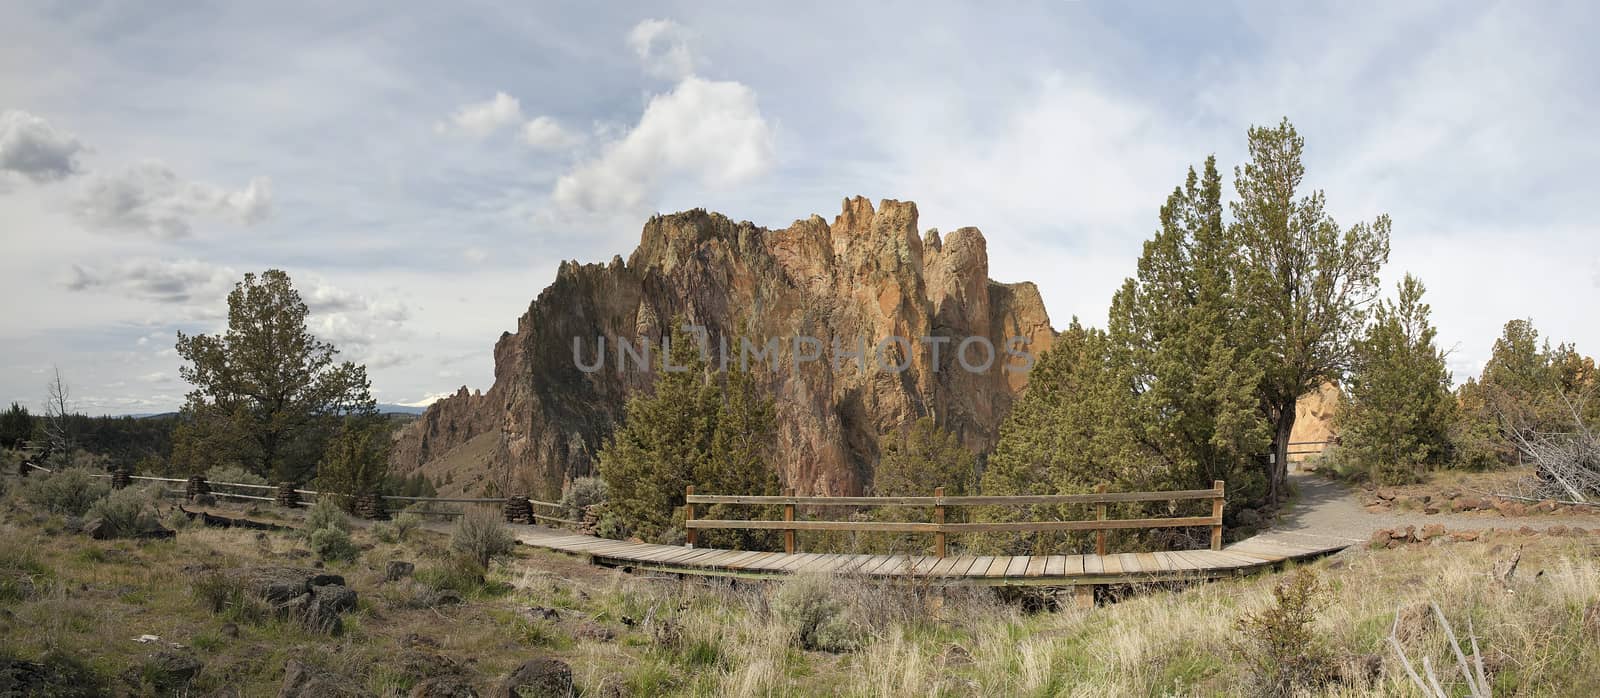 Hiking Trails at Smith Rock State Park by jpldesigns